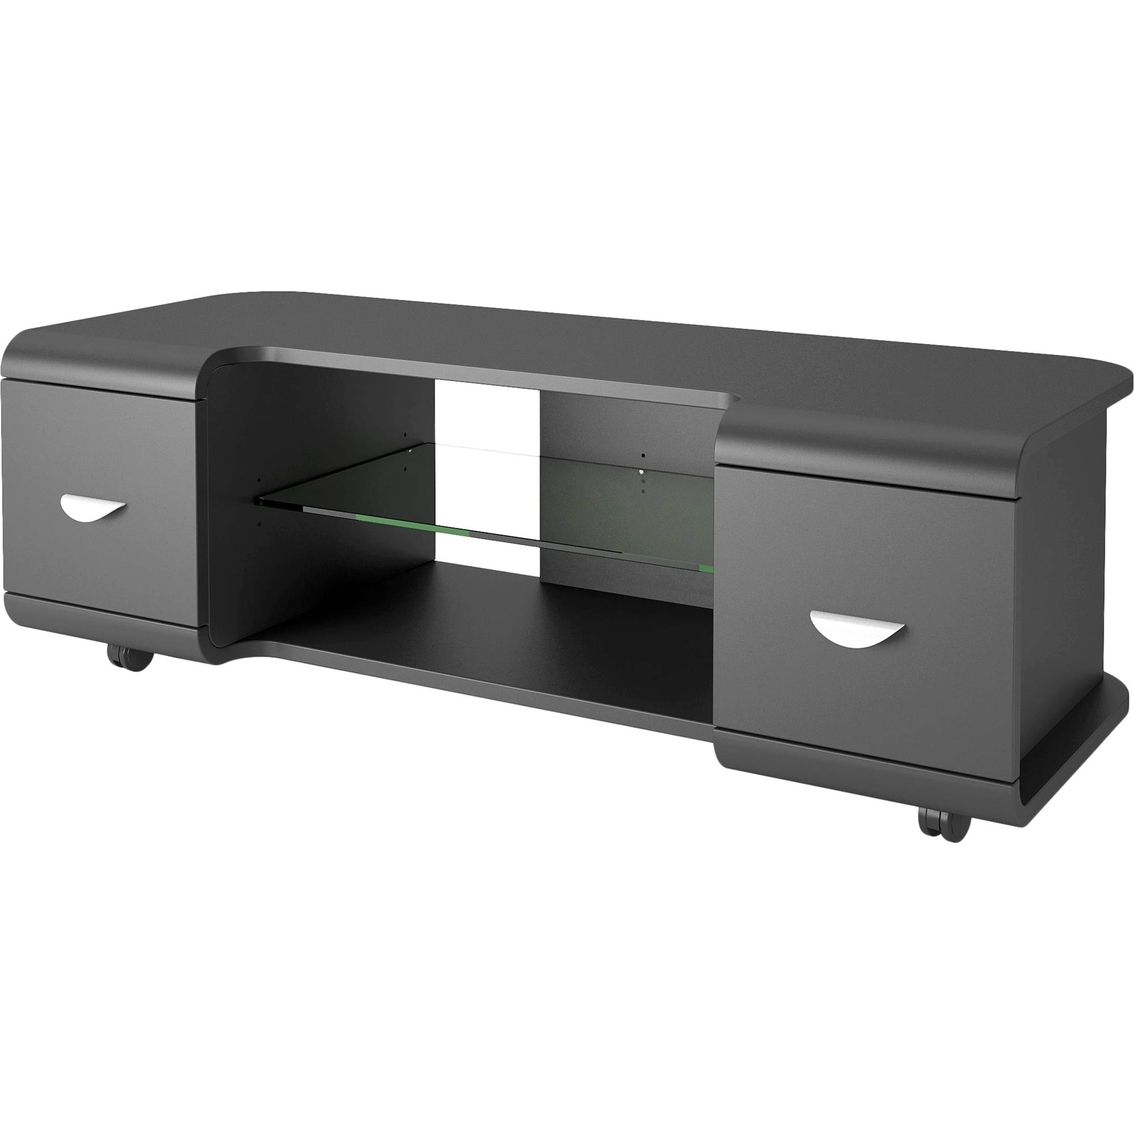 Corliving Panorama Tv Stand With Casters Holds Tvs Up To With Regard To Panorama Tv Stands (View 1 of 15)